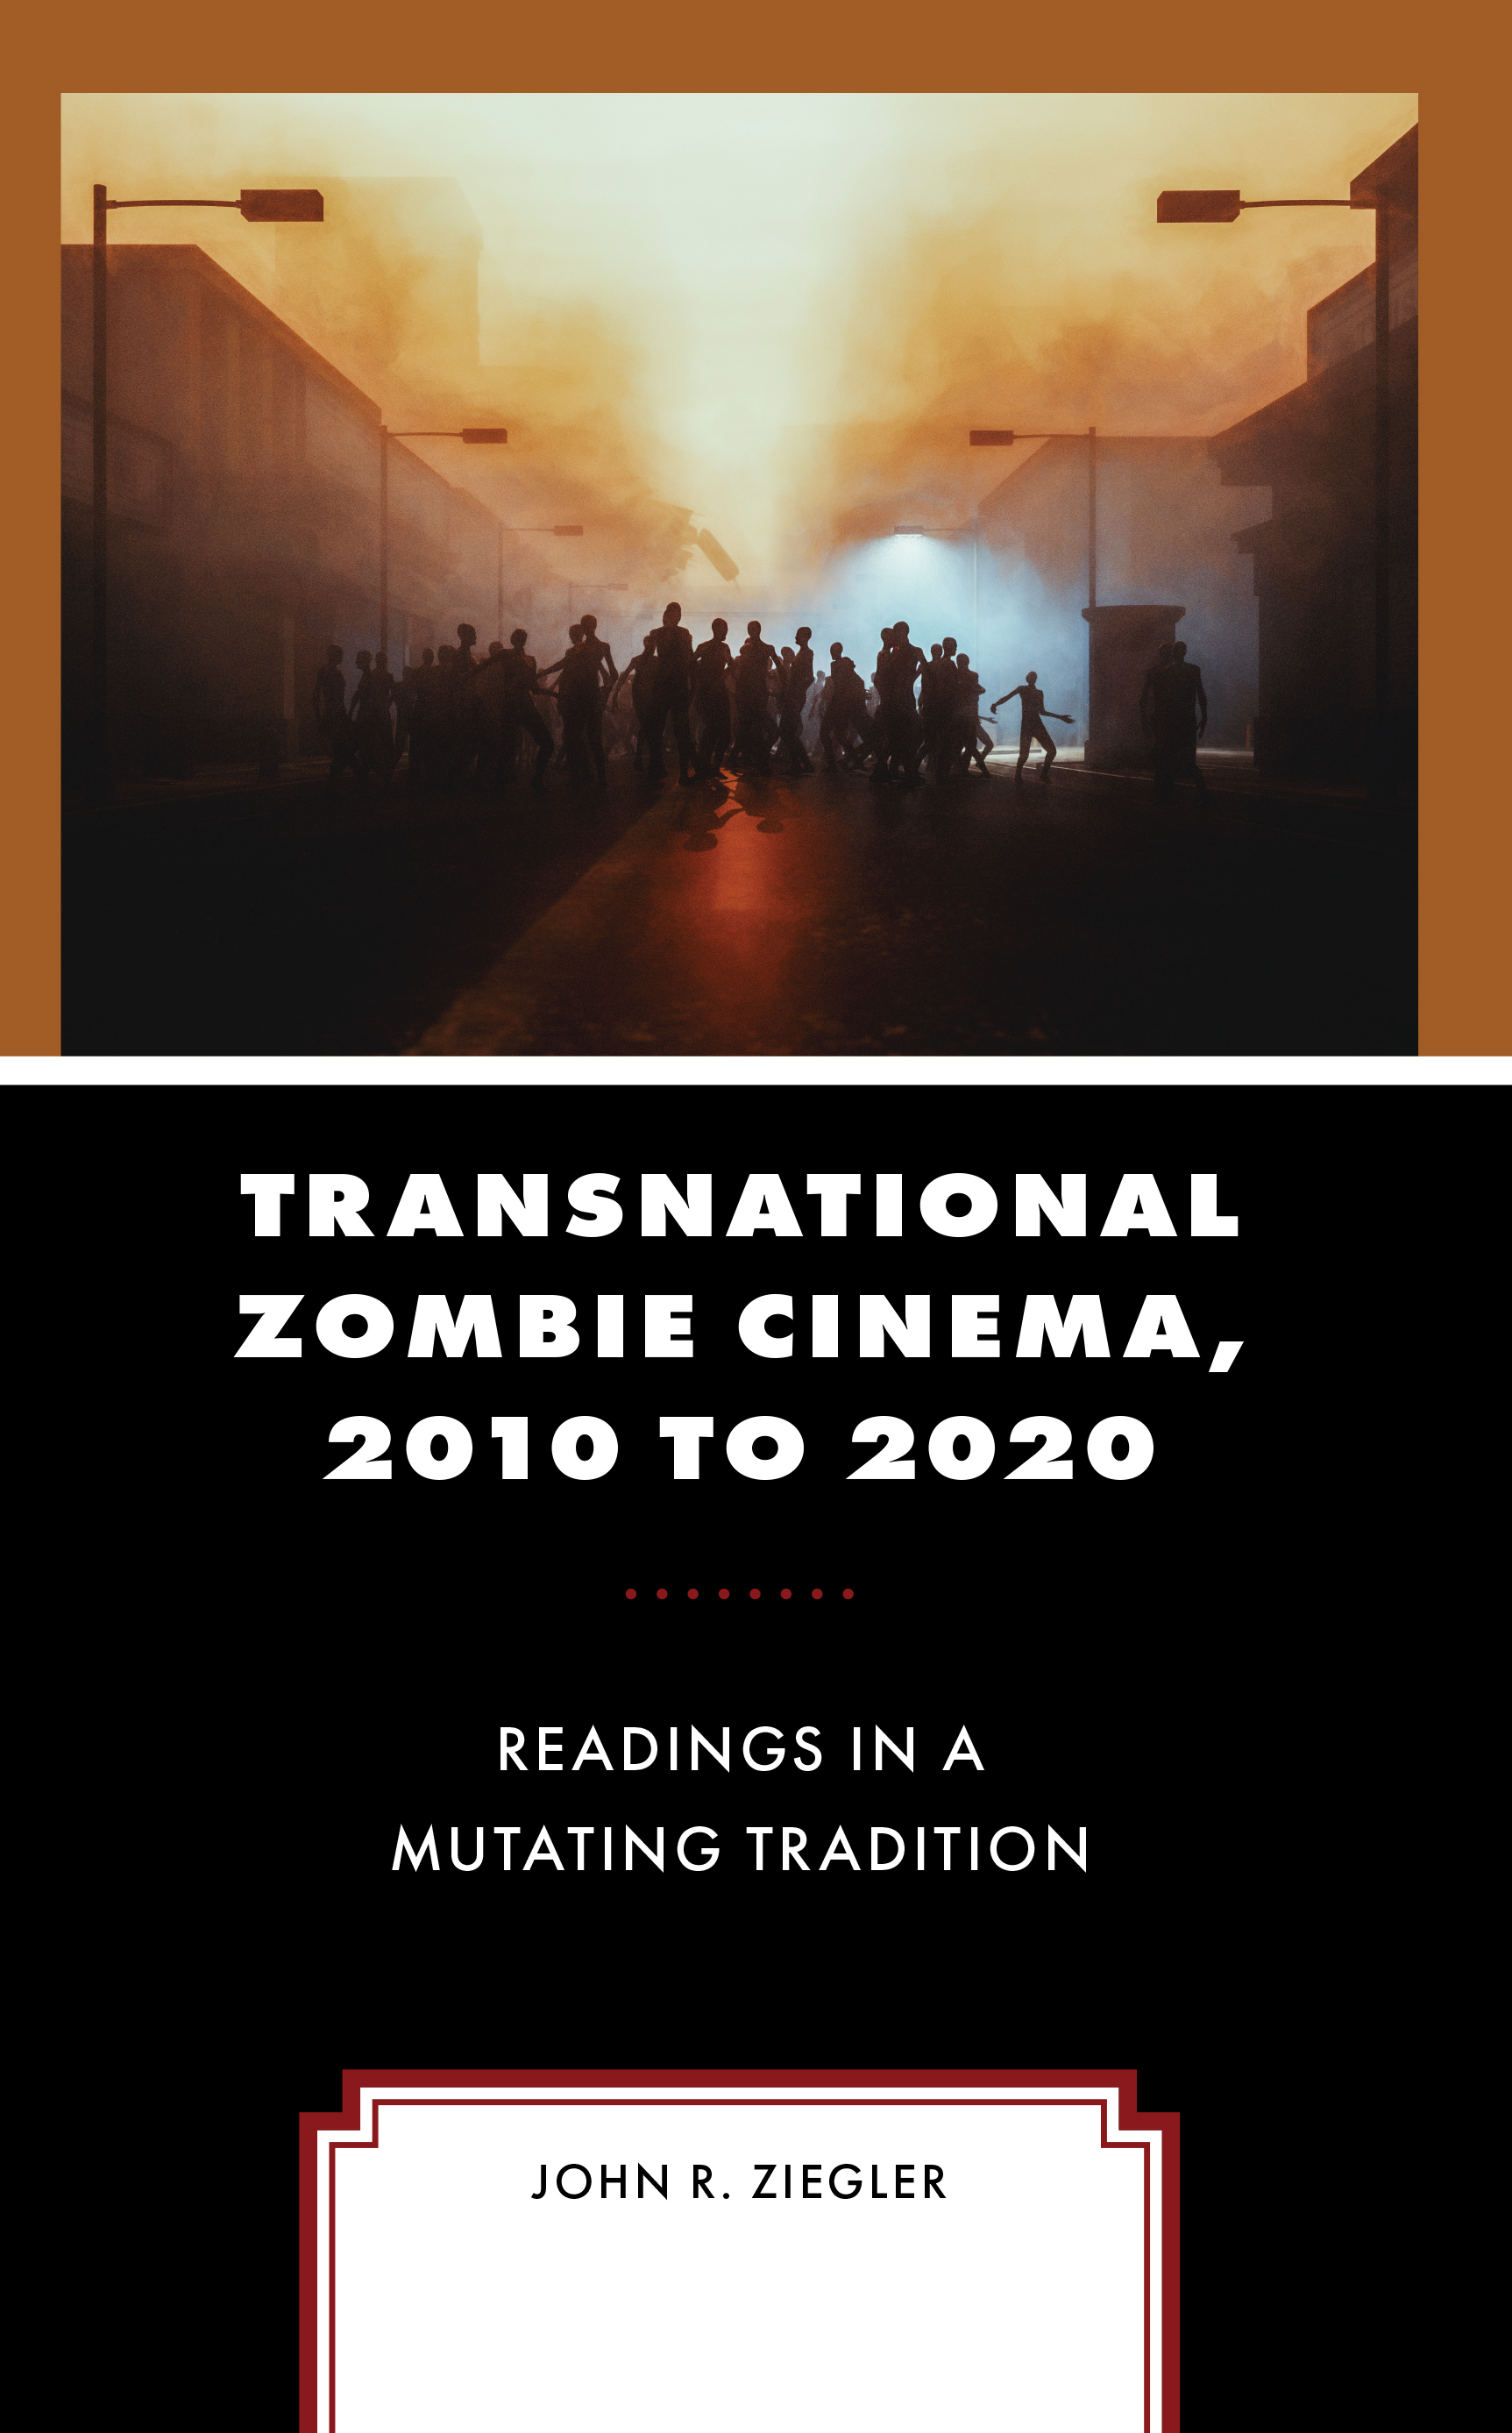 Transnational Zombie Cinema, 2010 to 2020: Readings in a Mutating Tradition